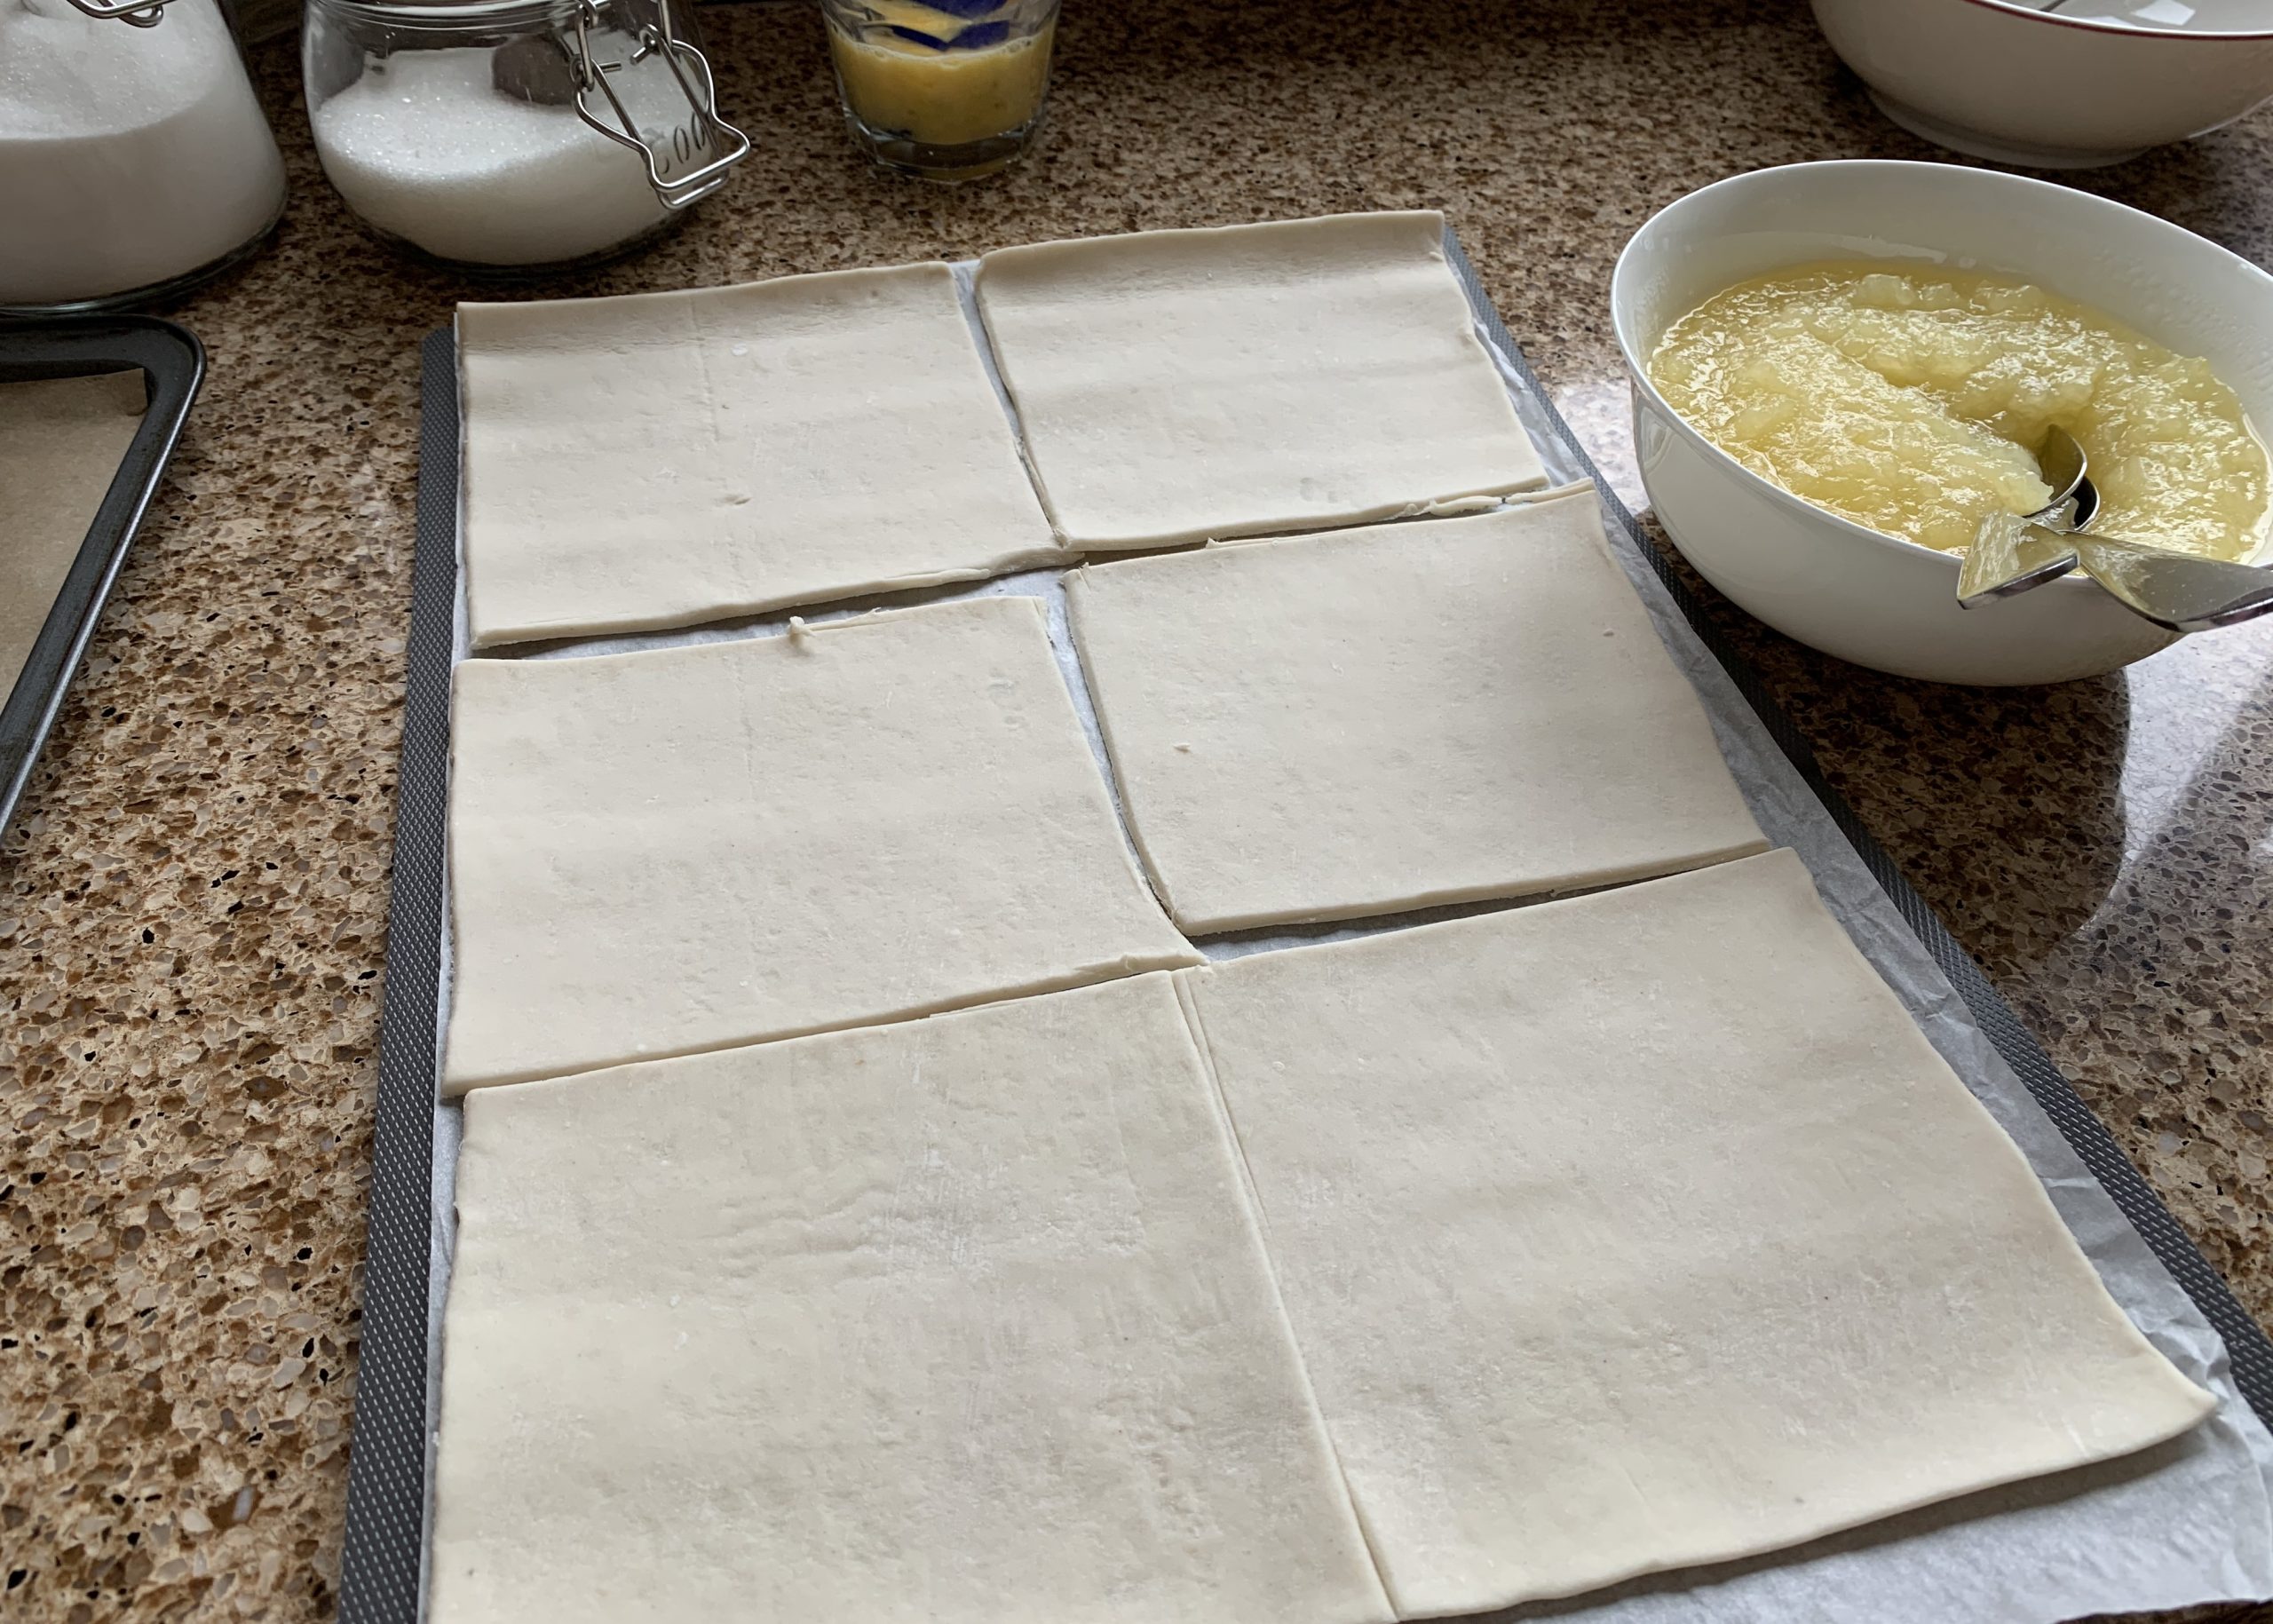 Process of making gluten free apple turnovers